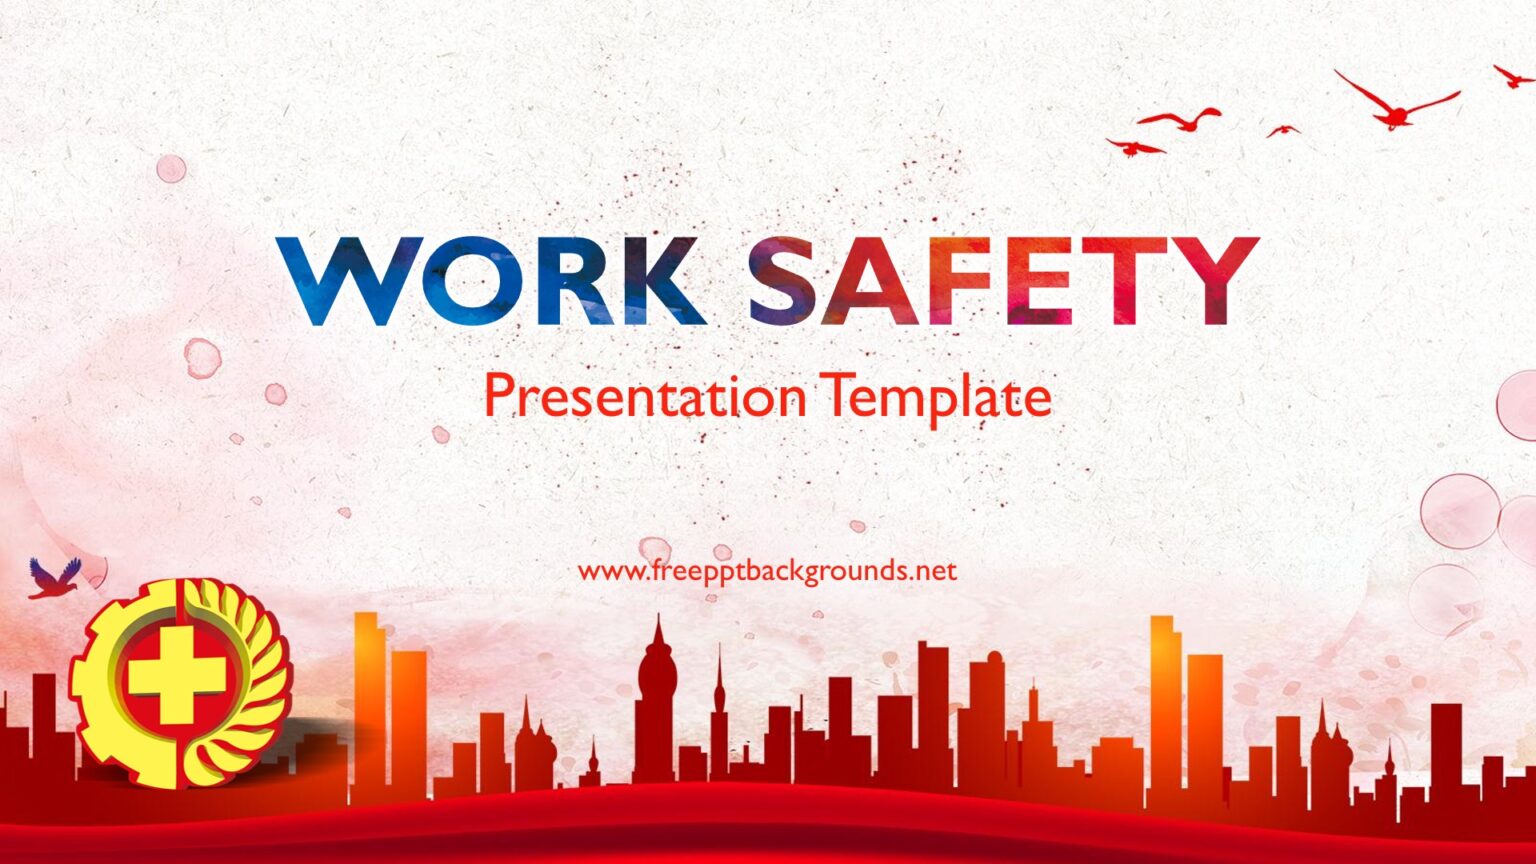 Work Safety Powerpoint Templates Buildings & Landmarks, Red Free